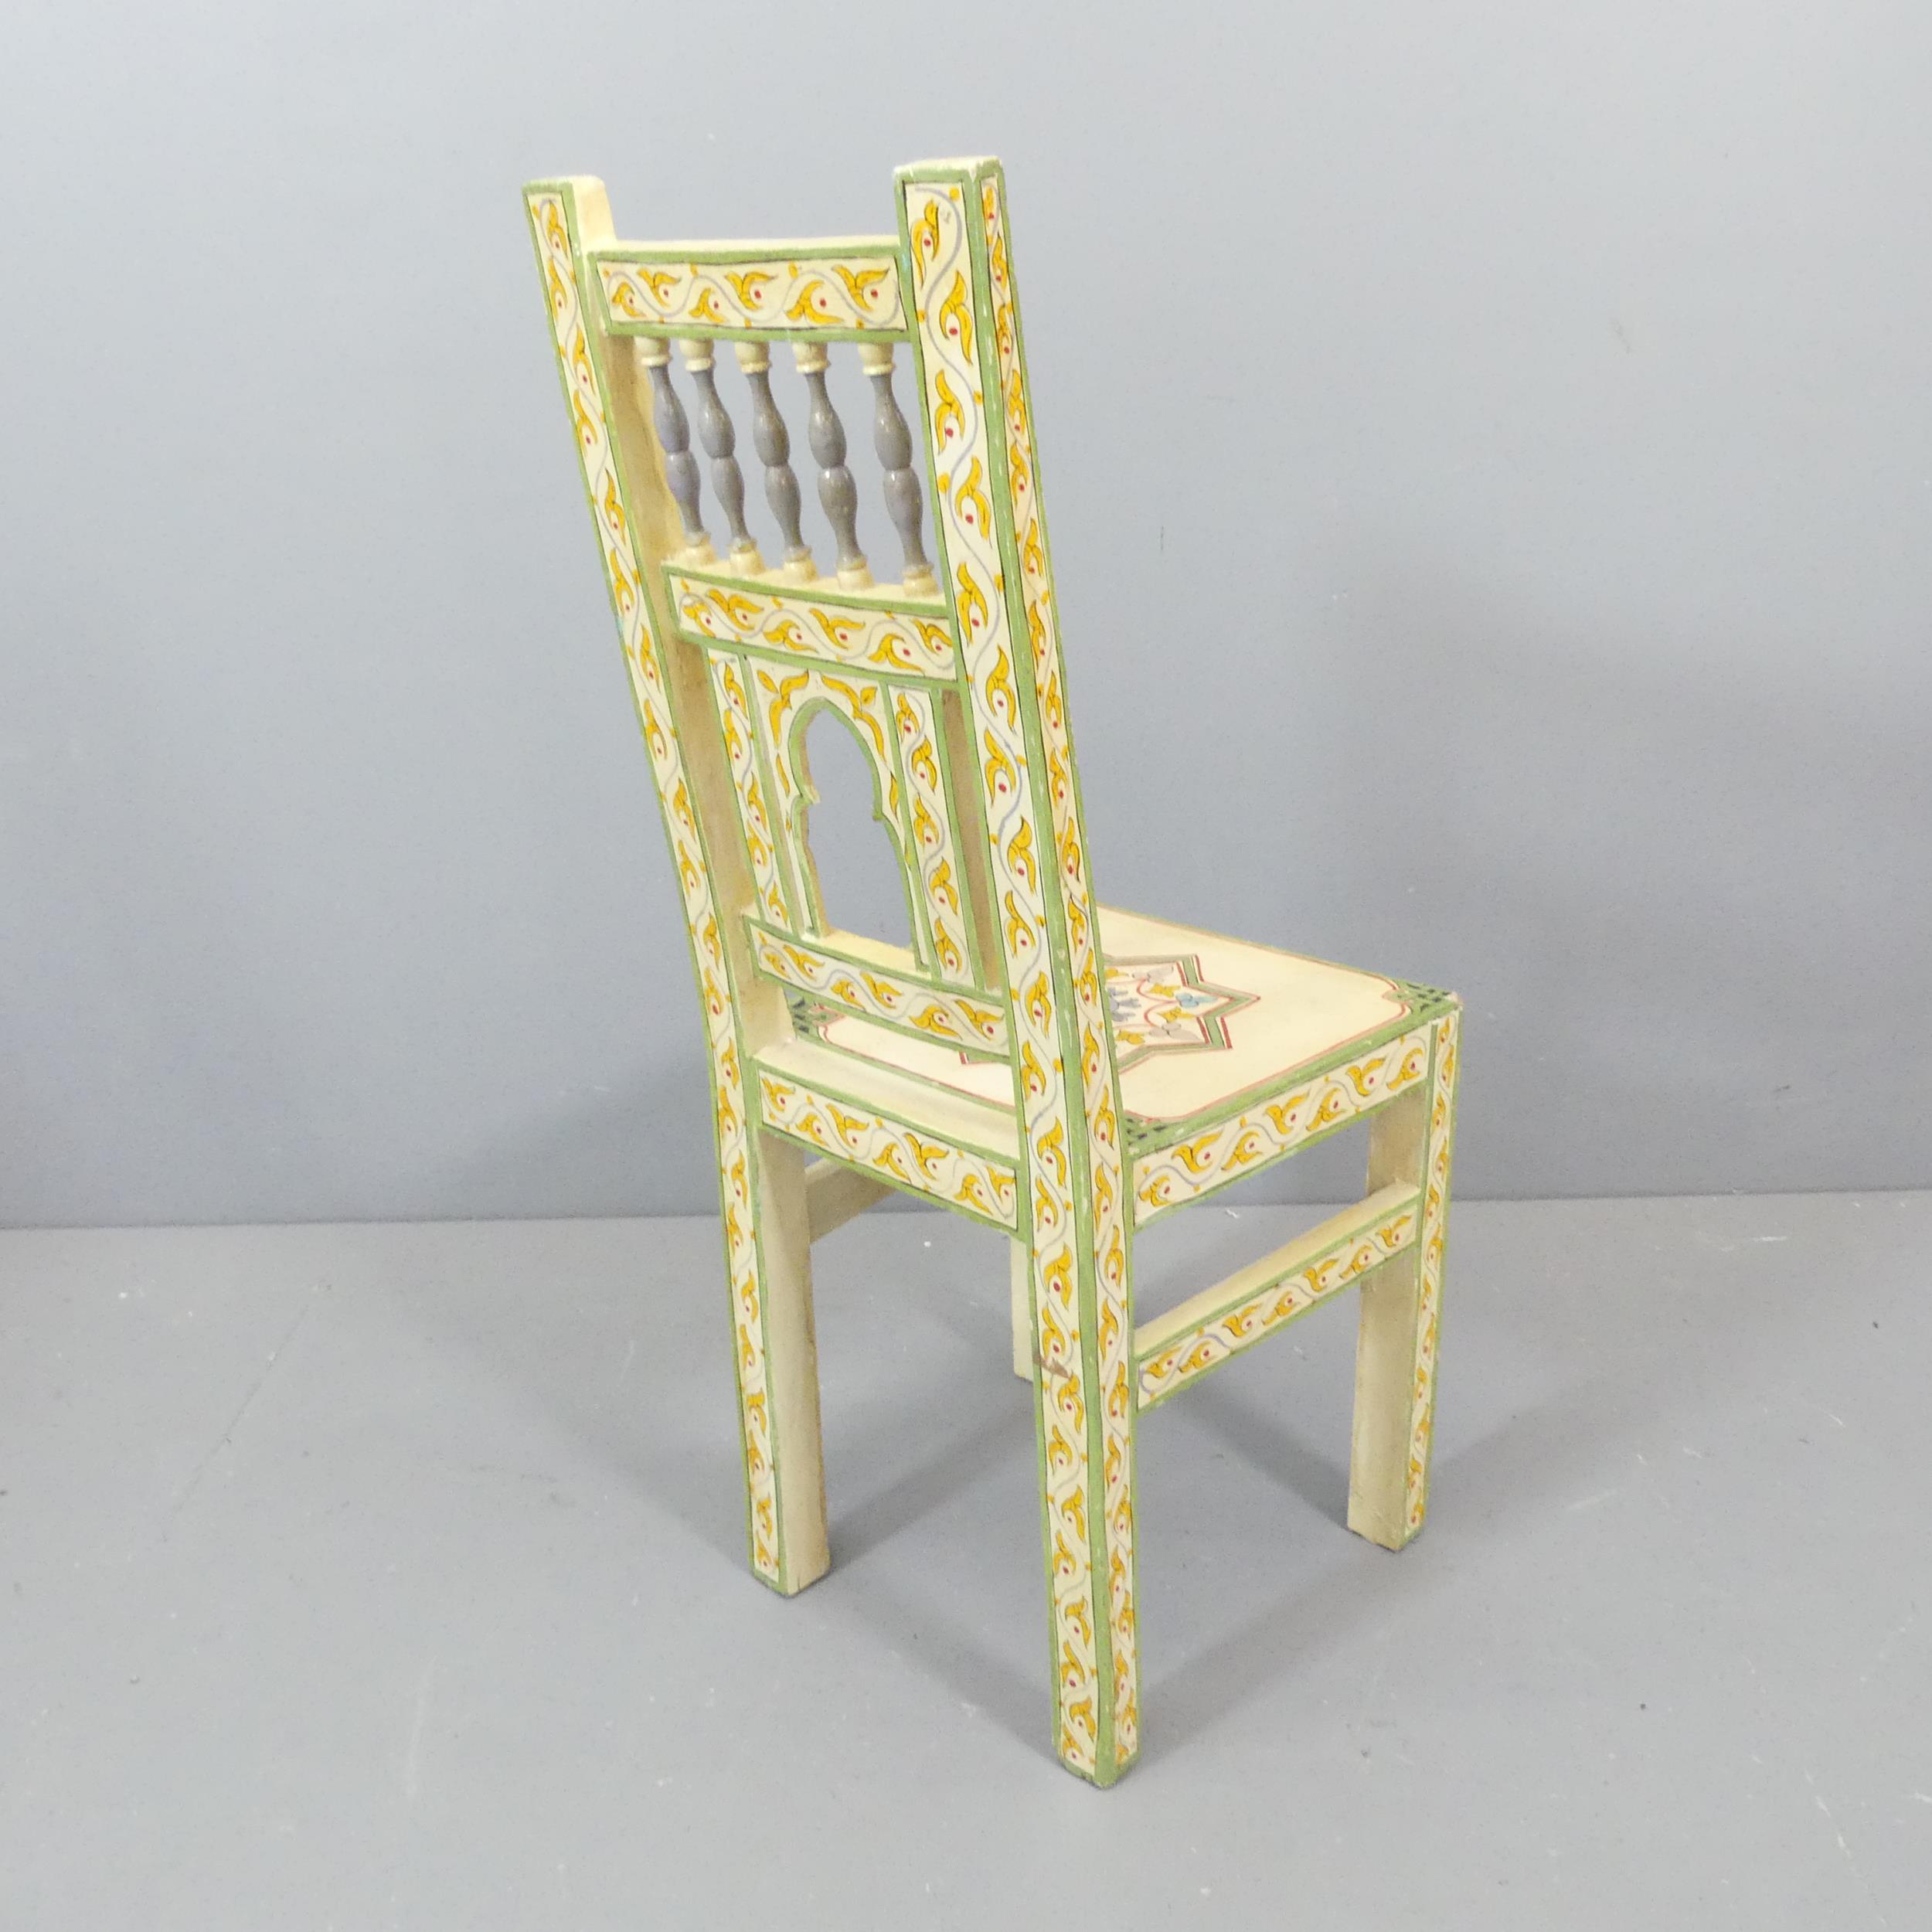 A Moroccan style painted pine chair. - Image 2 of 2